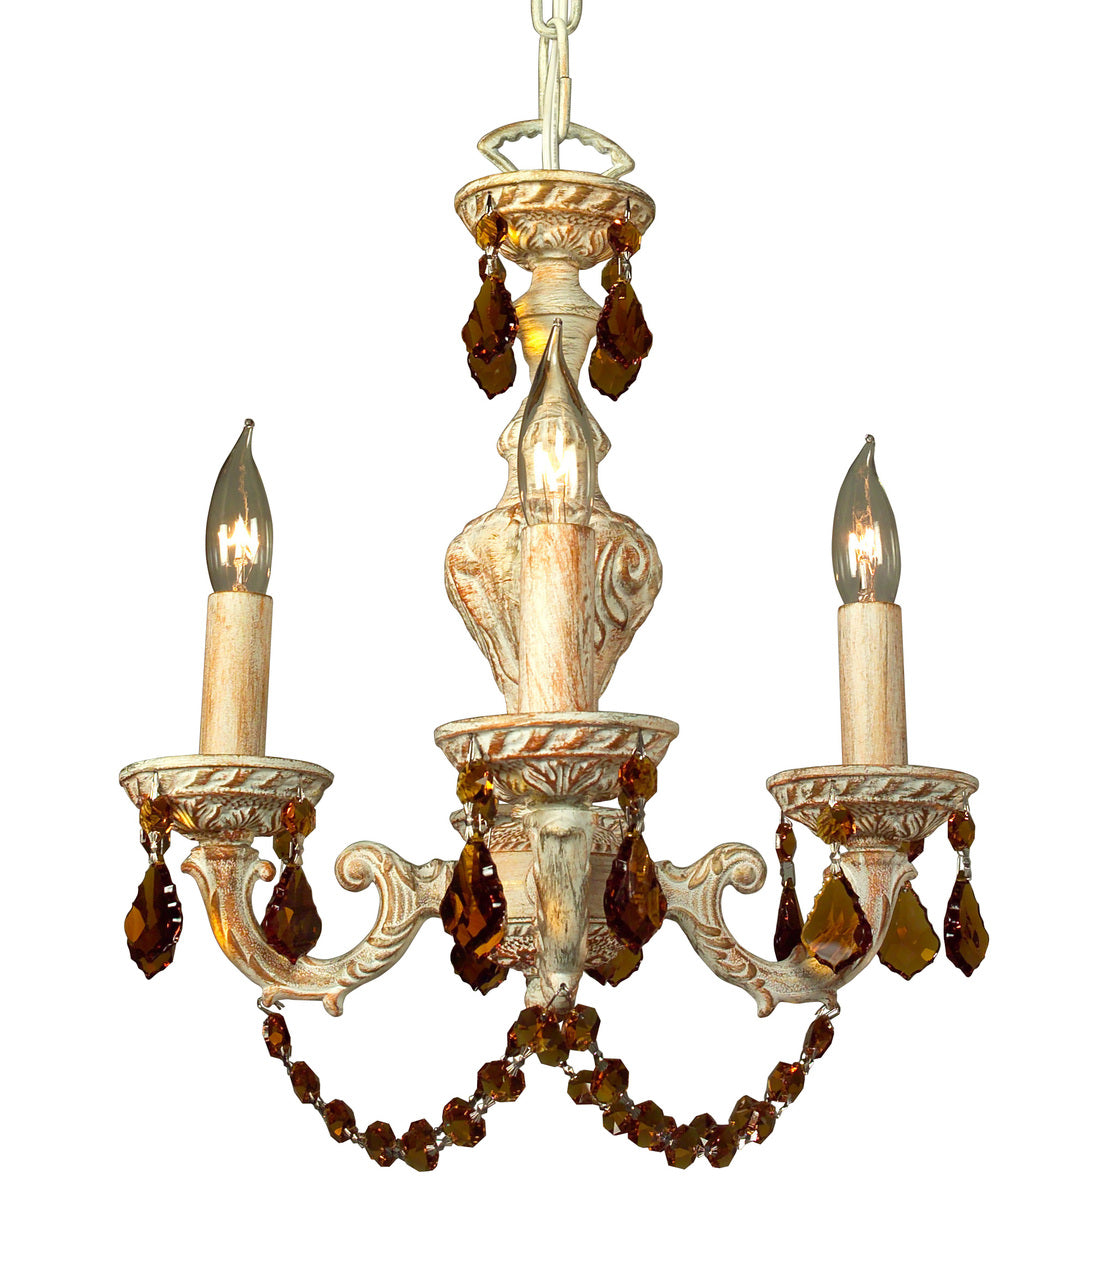 Classic Lighting 8335 AMB AM Gabrielle Crystal Mini Chandelier in Amber/Antique White